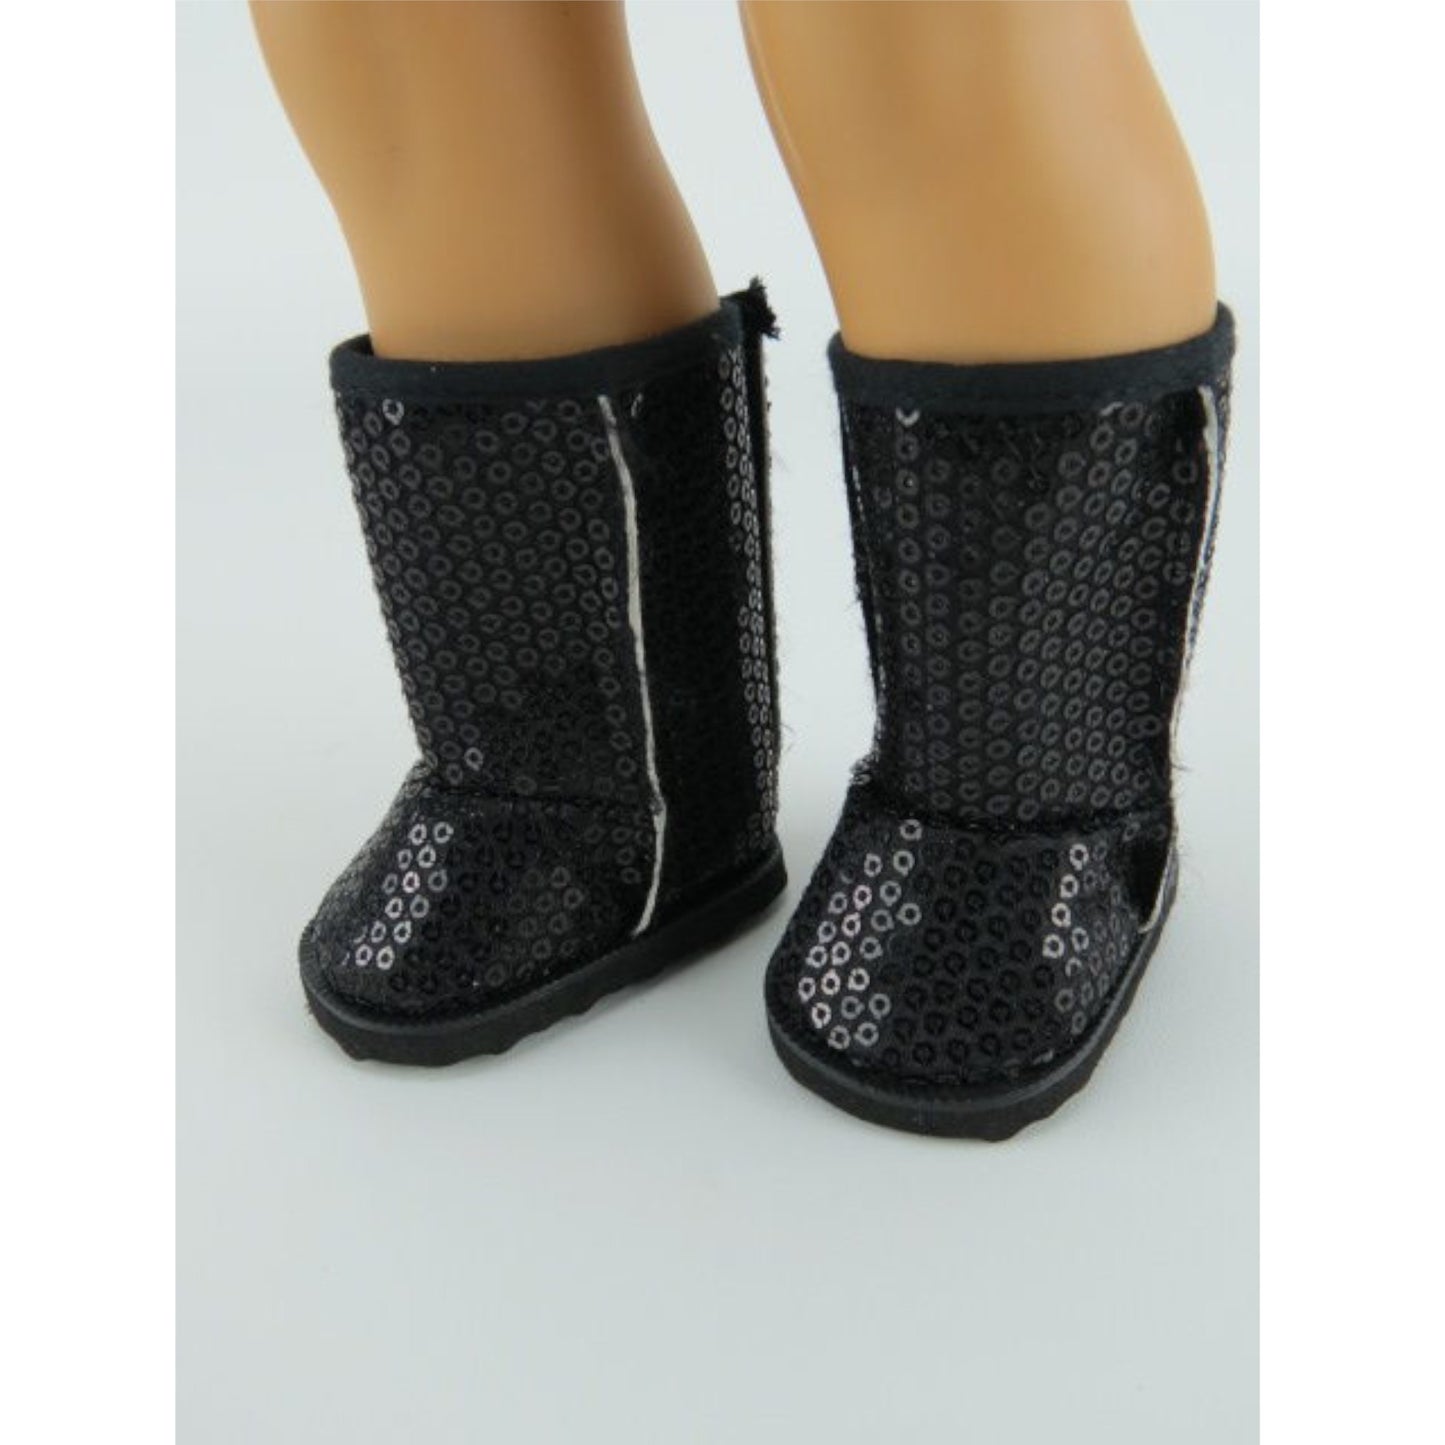 Black Sequin Boots for 18-inch dolls